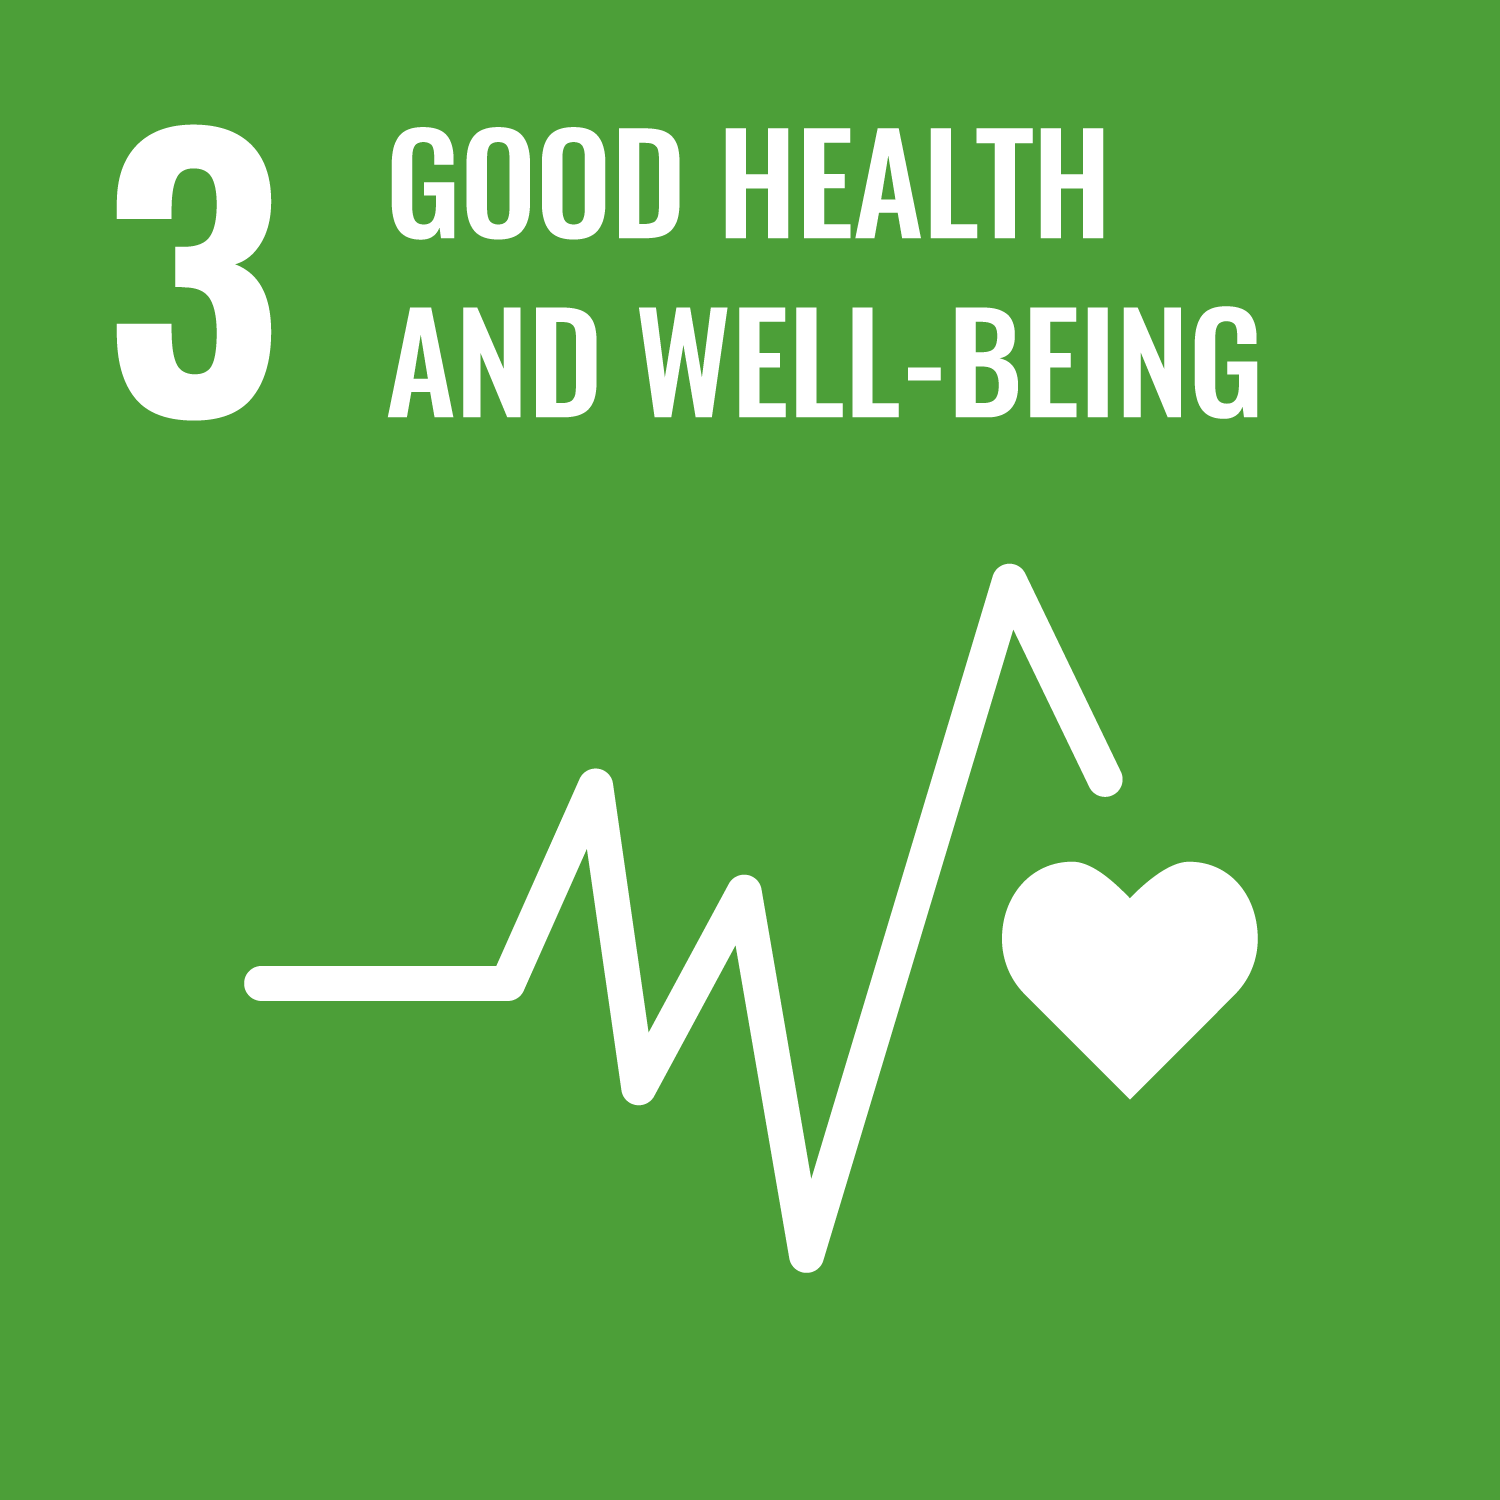 SDGs Goal 3 Good Health and Well-Being cover image